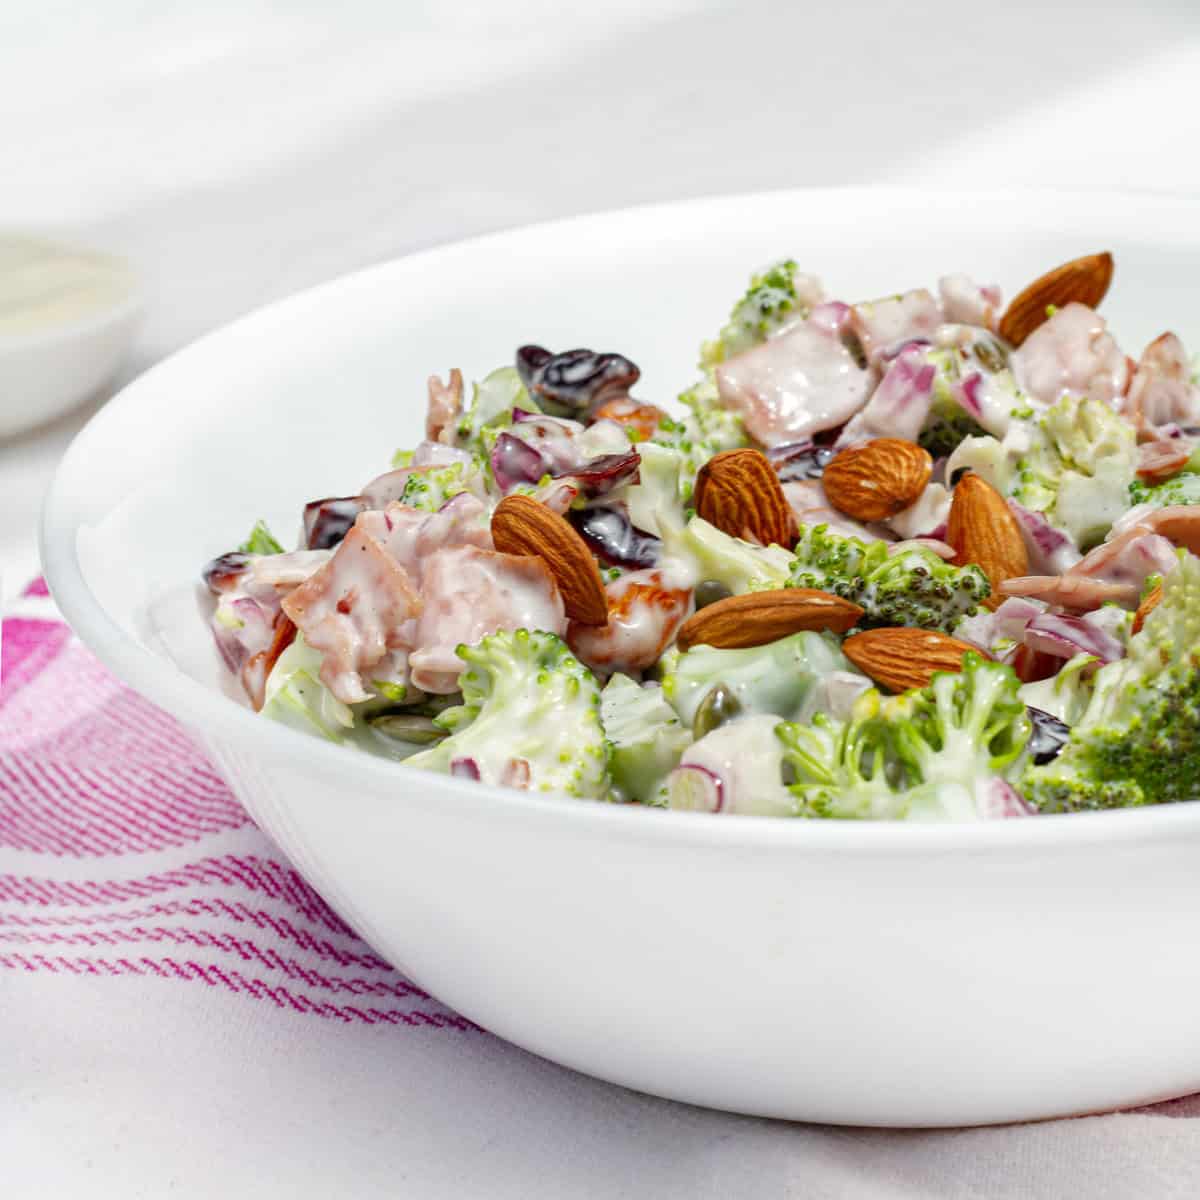 A healthy yet creamy twist on the classic Midwestern broccoli salad with ham and dried cranberries.